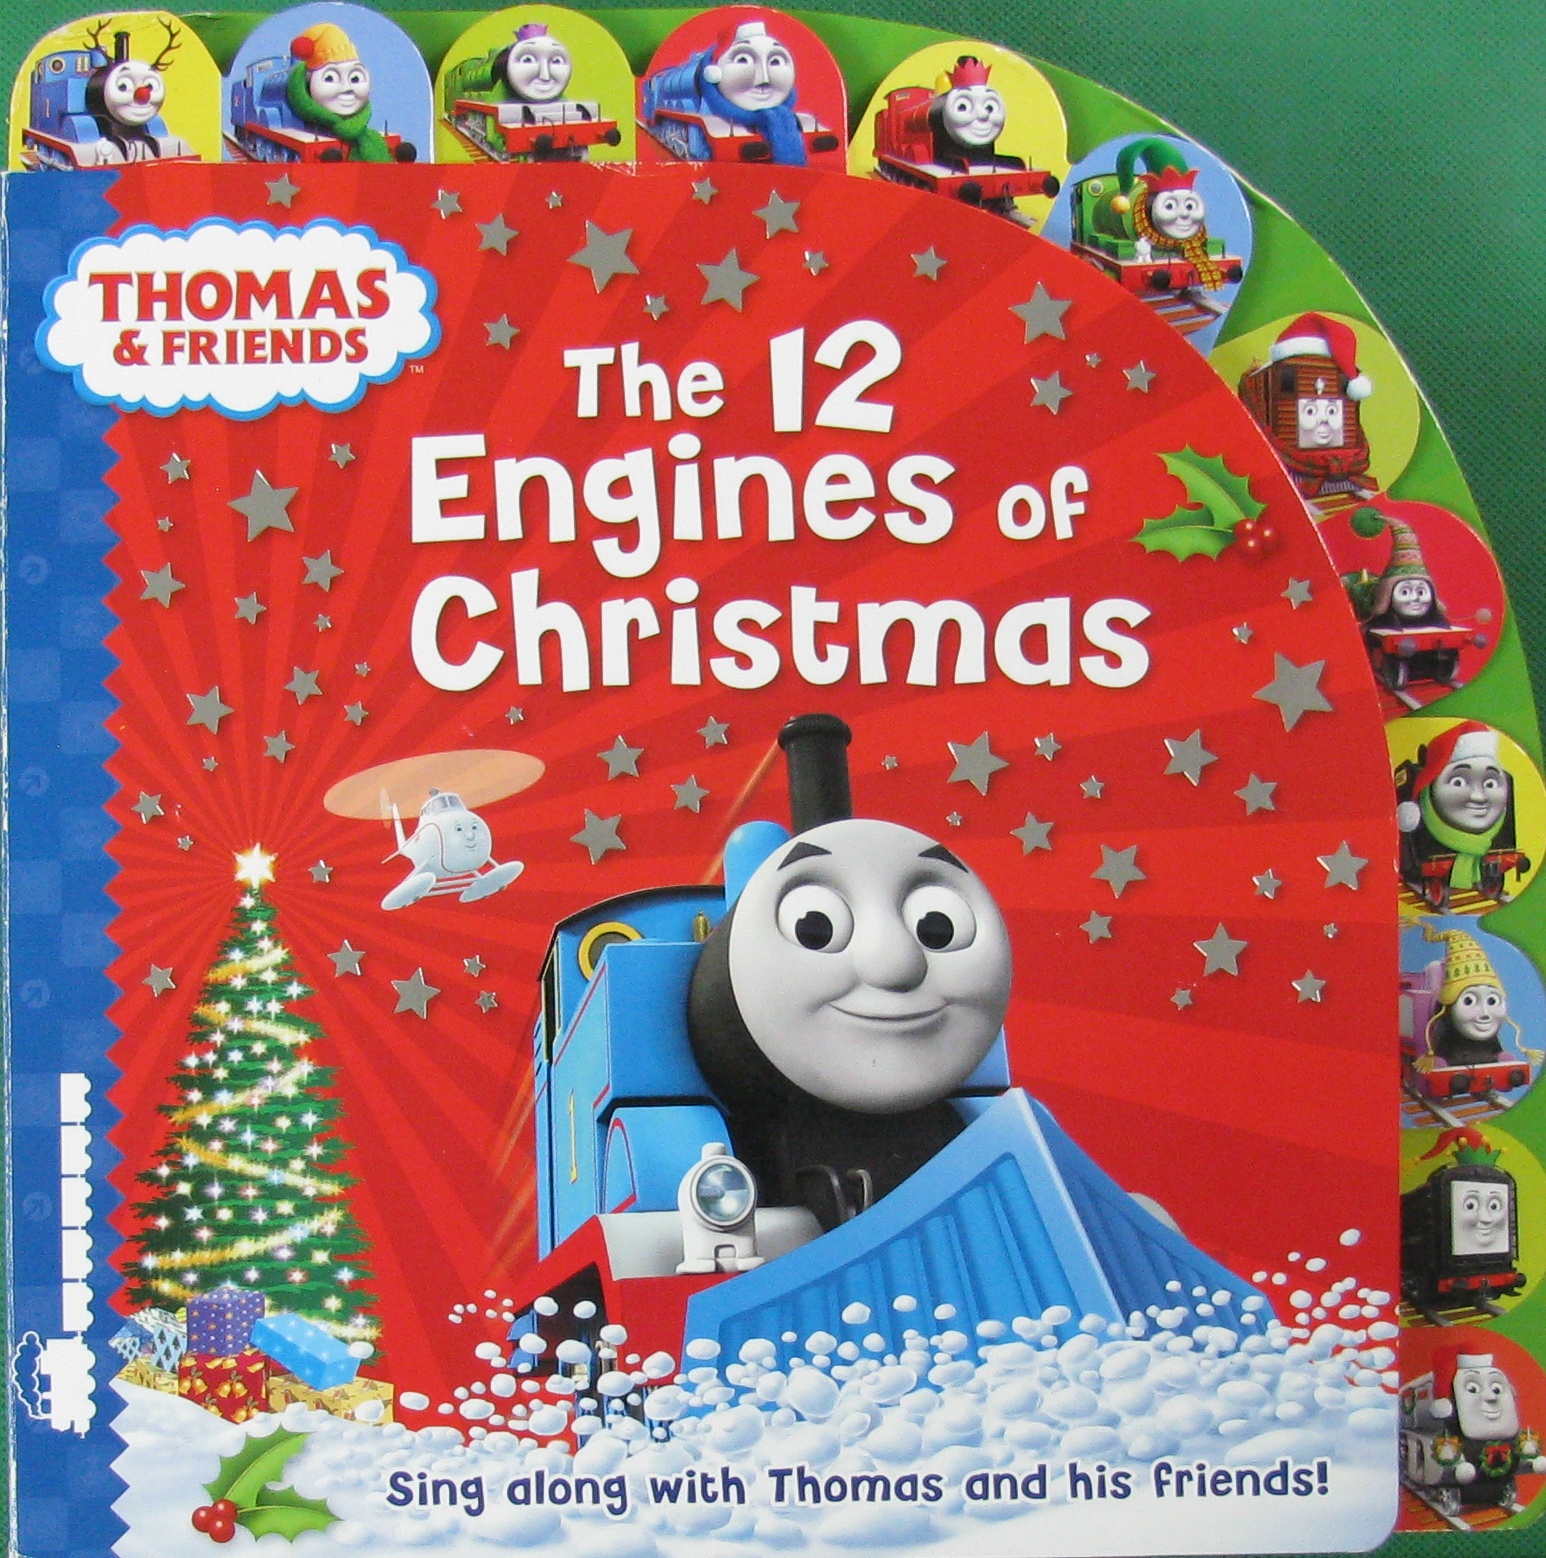 the 12 engines of christmas (机器翻译:托马斯与小伙伴们:圣诞节的